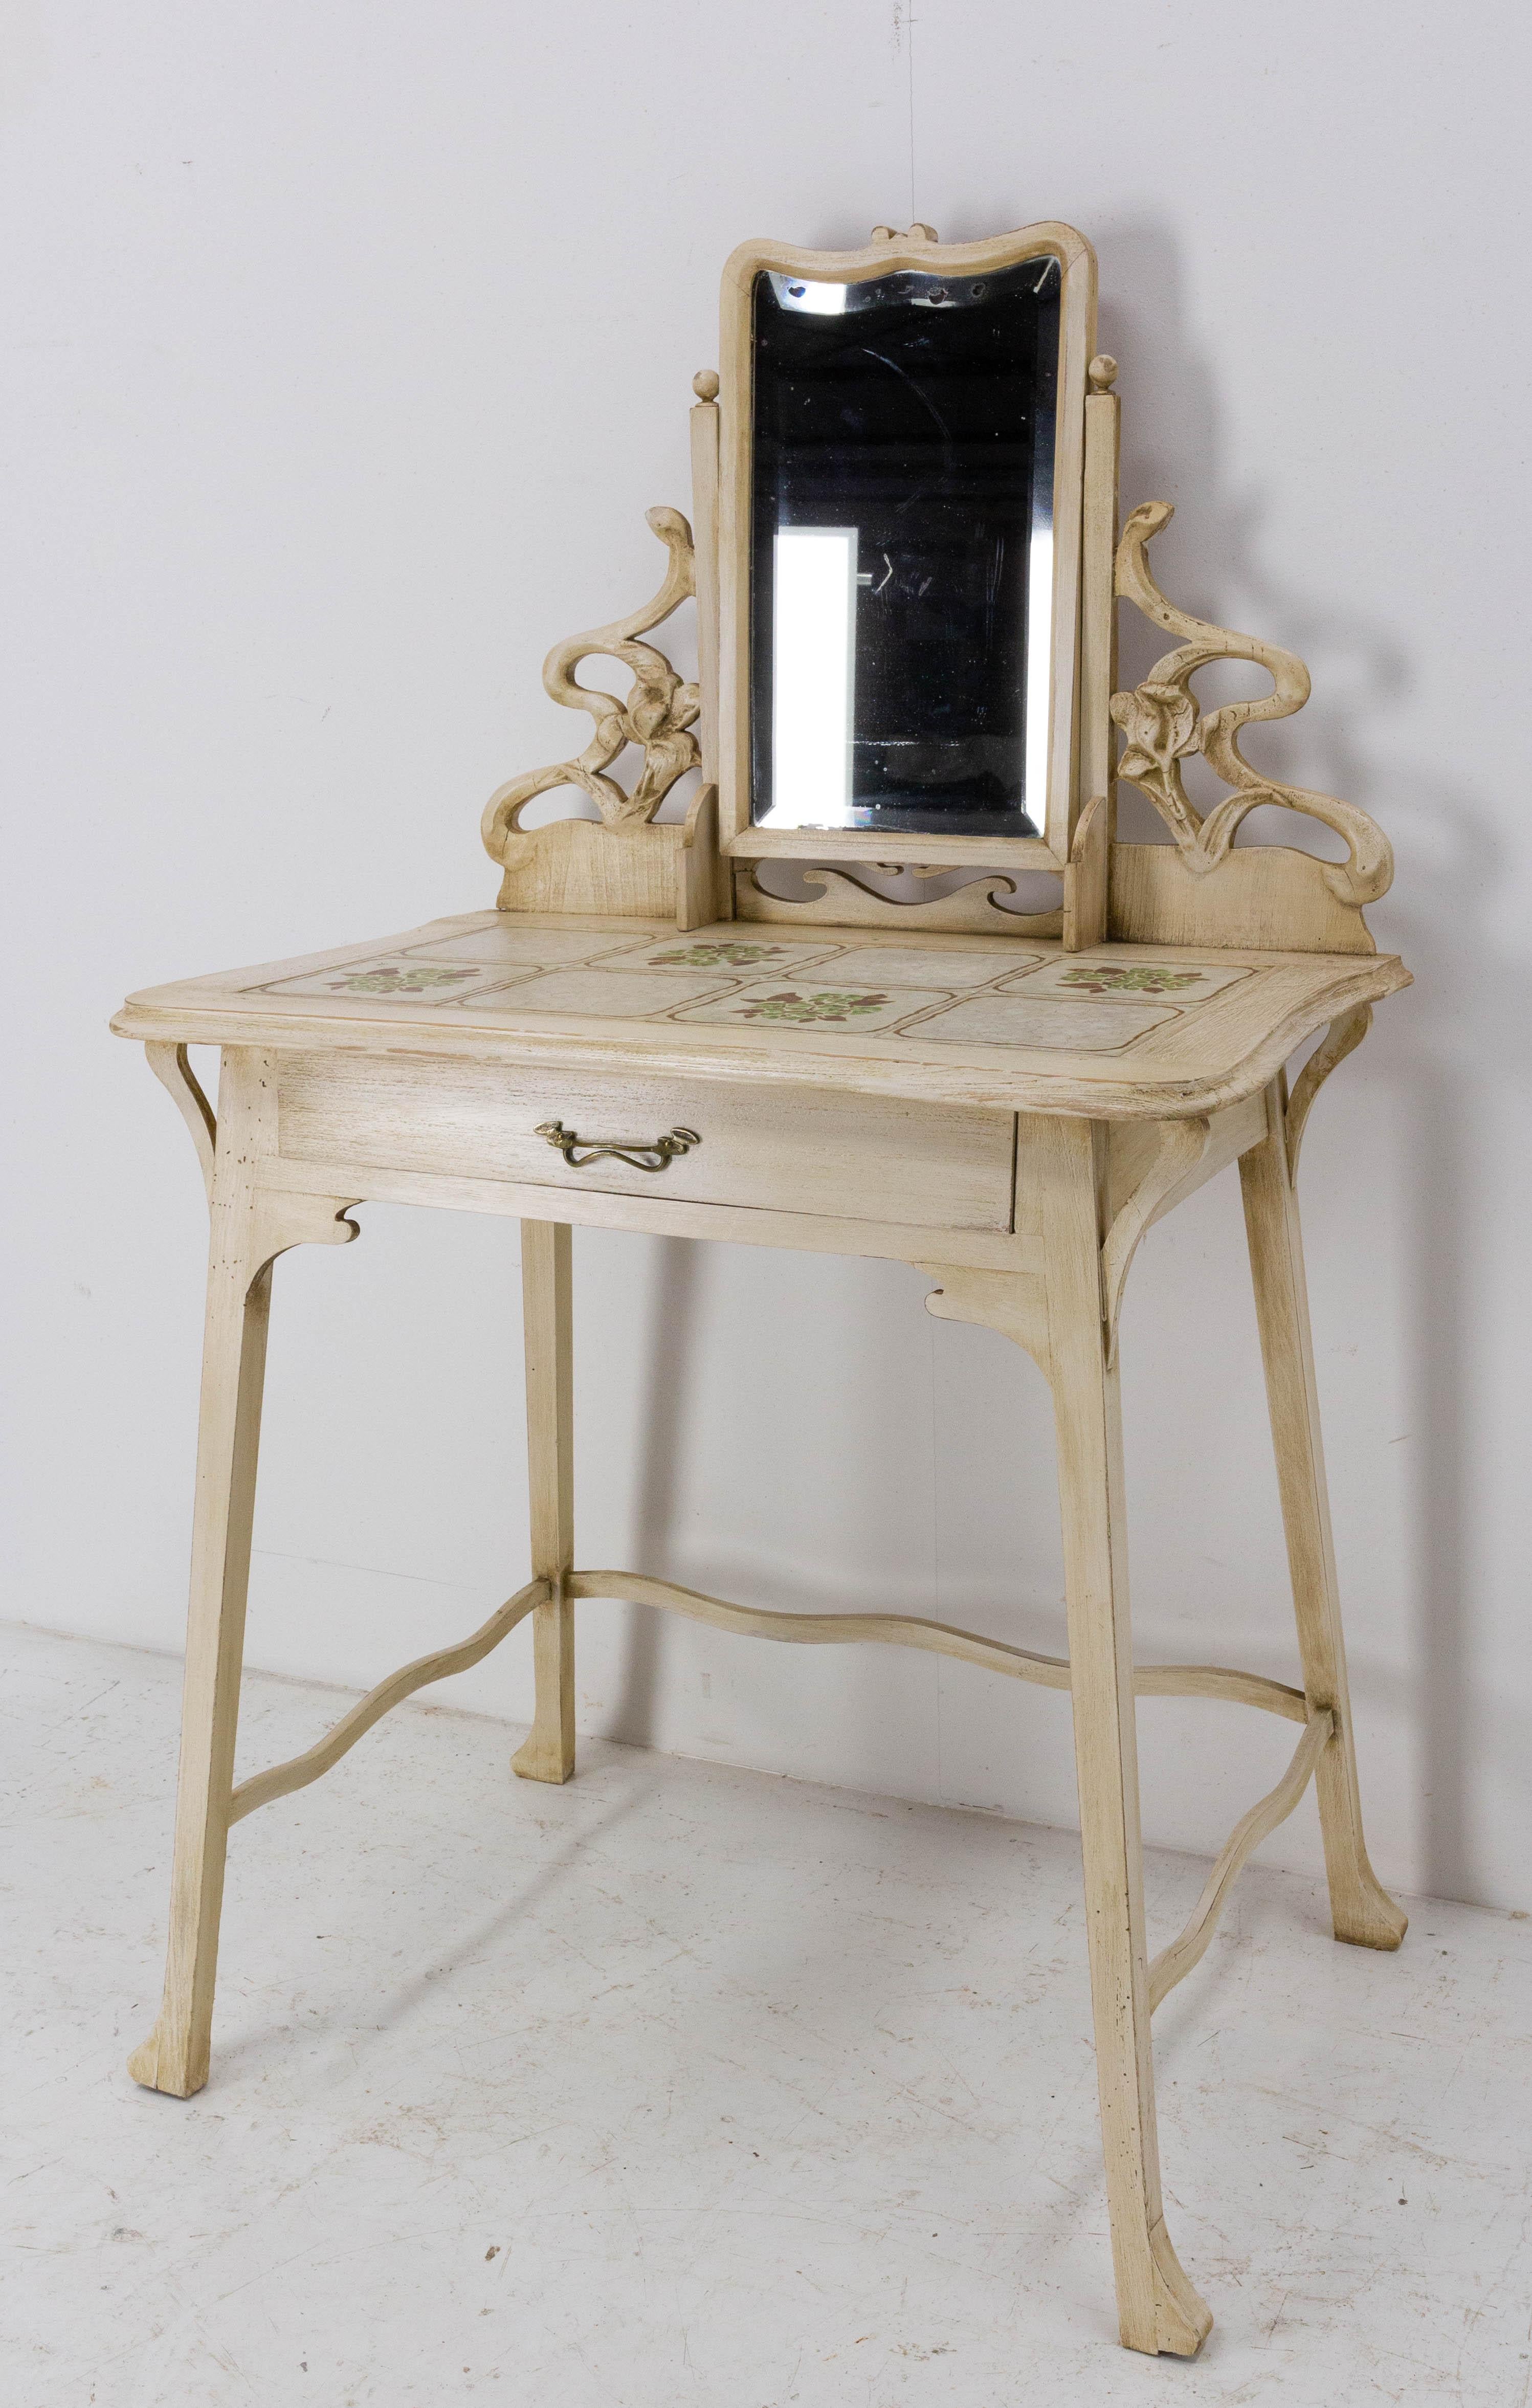 Vanity dressing table with central mirror and one drawer
French late 19th century
Cherrywood, ceramic and beveled mirror. 
All the details of this vanity table are typical of Art Nouveau: the shape of the feet, the wavy side bars, the vegetal and